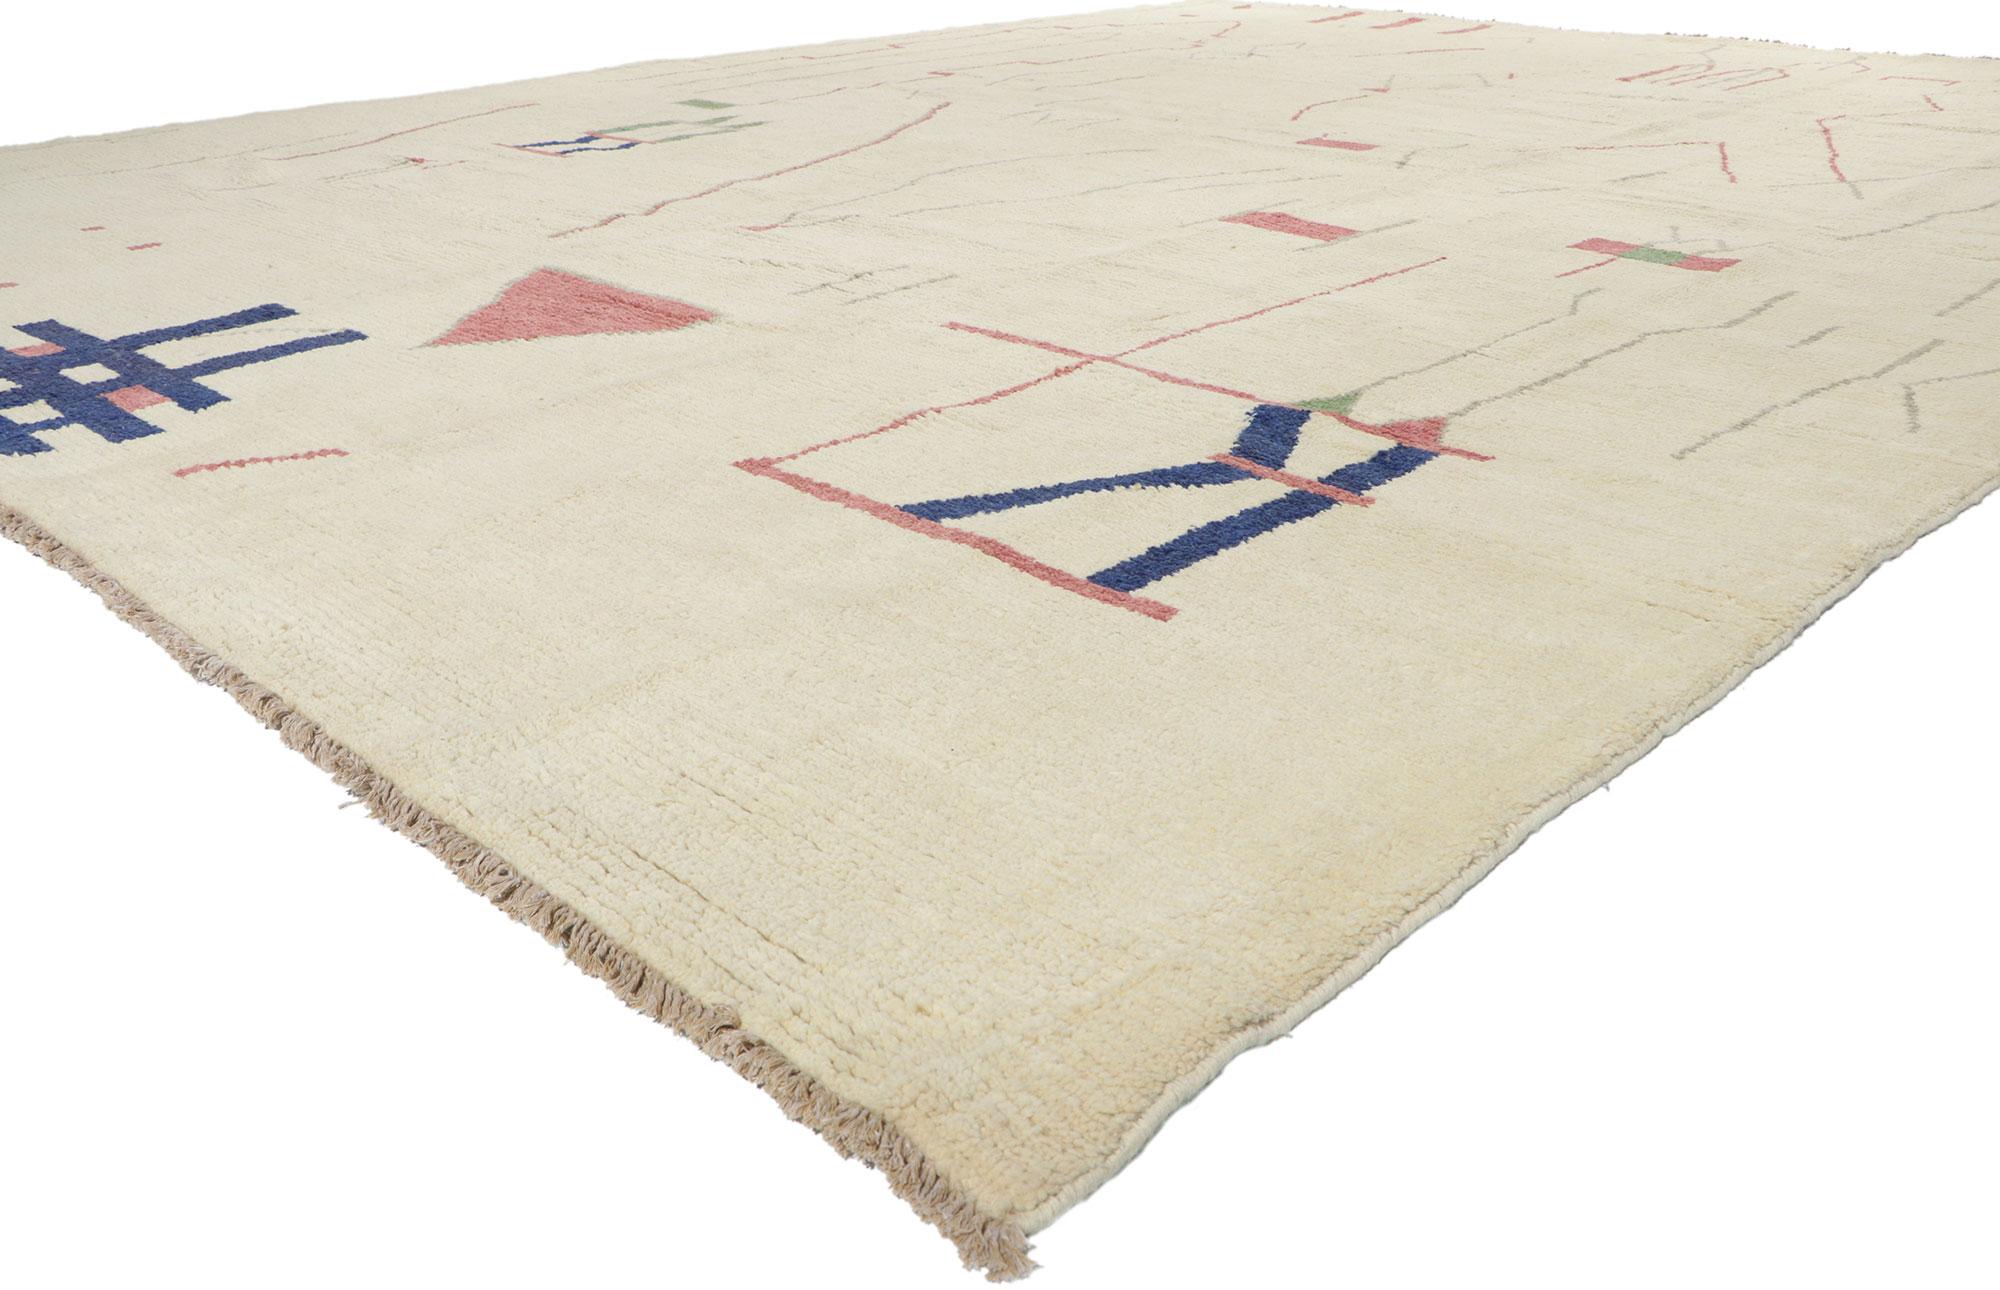 80694 new Contemporary oversized Moroccan rug with Modern Brutalist Style 12'05 x 15'05. Recalling the Brutalist, this contemporary oversized Moroccan rug is an amalgam of International style and the very definition of celebrated and spirited high